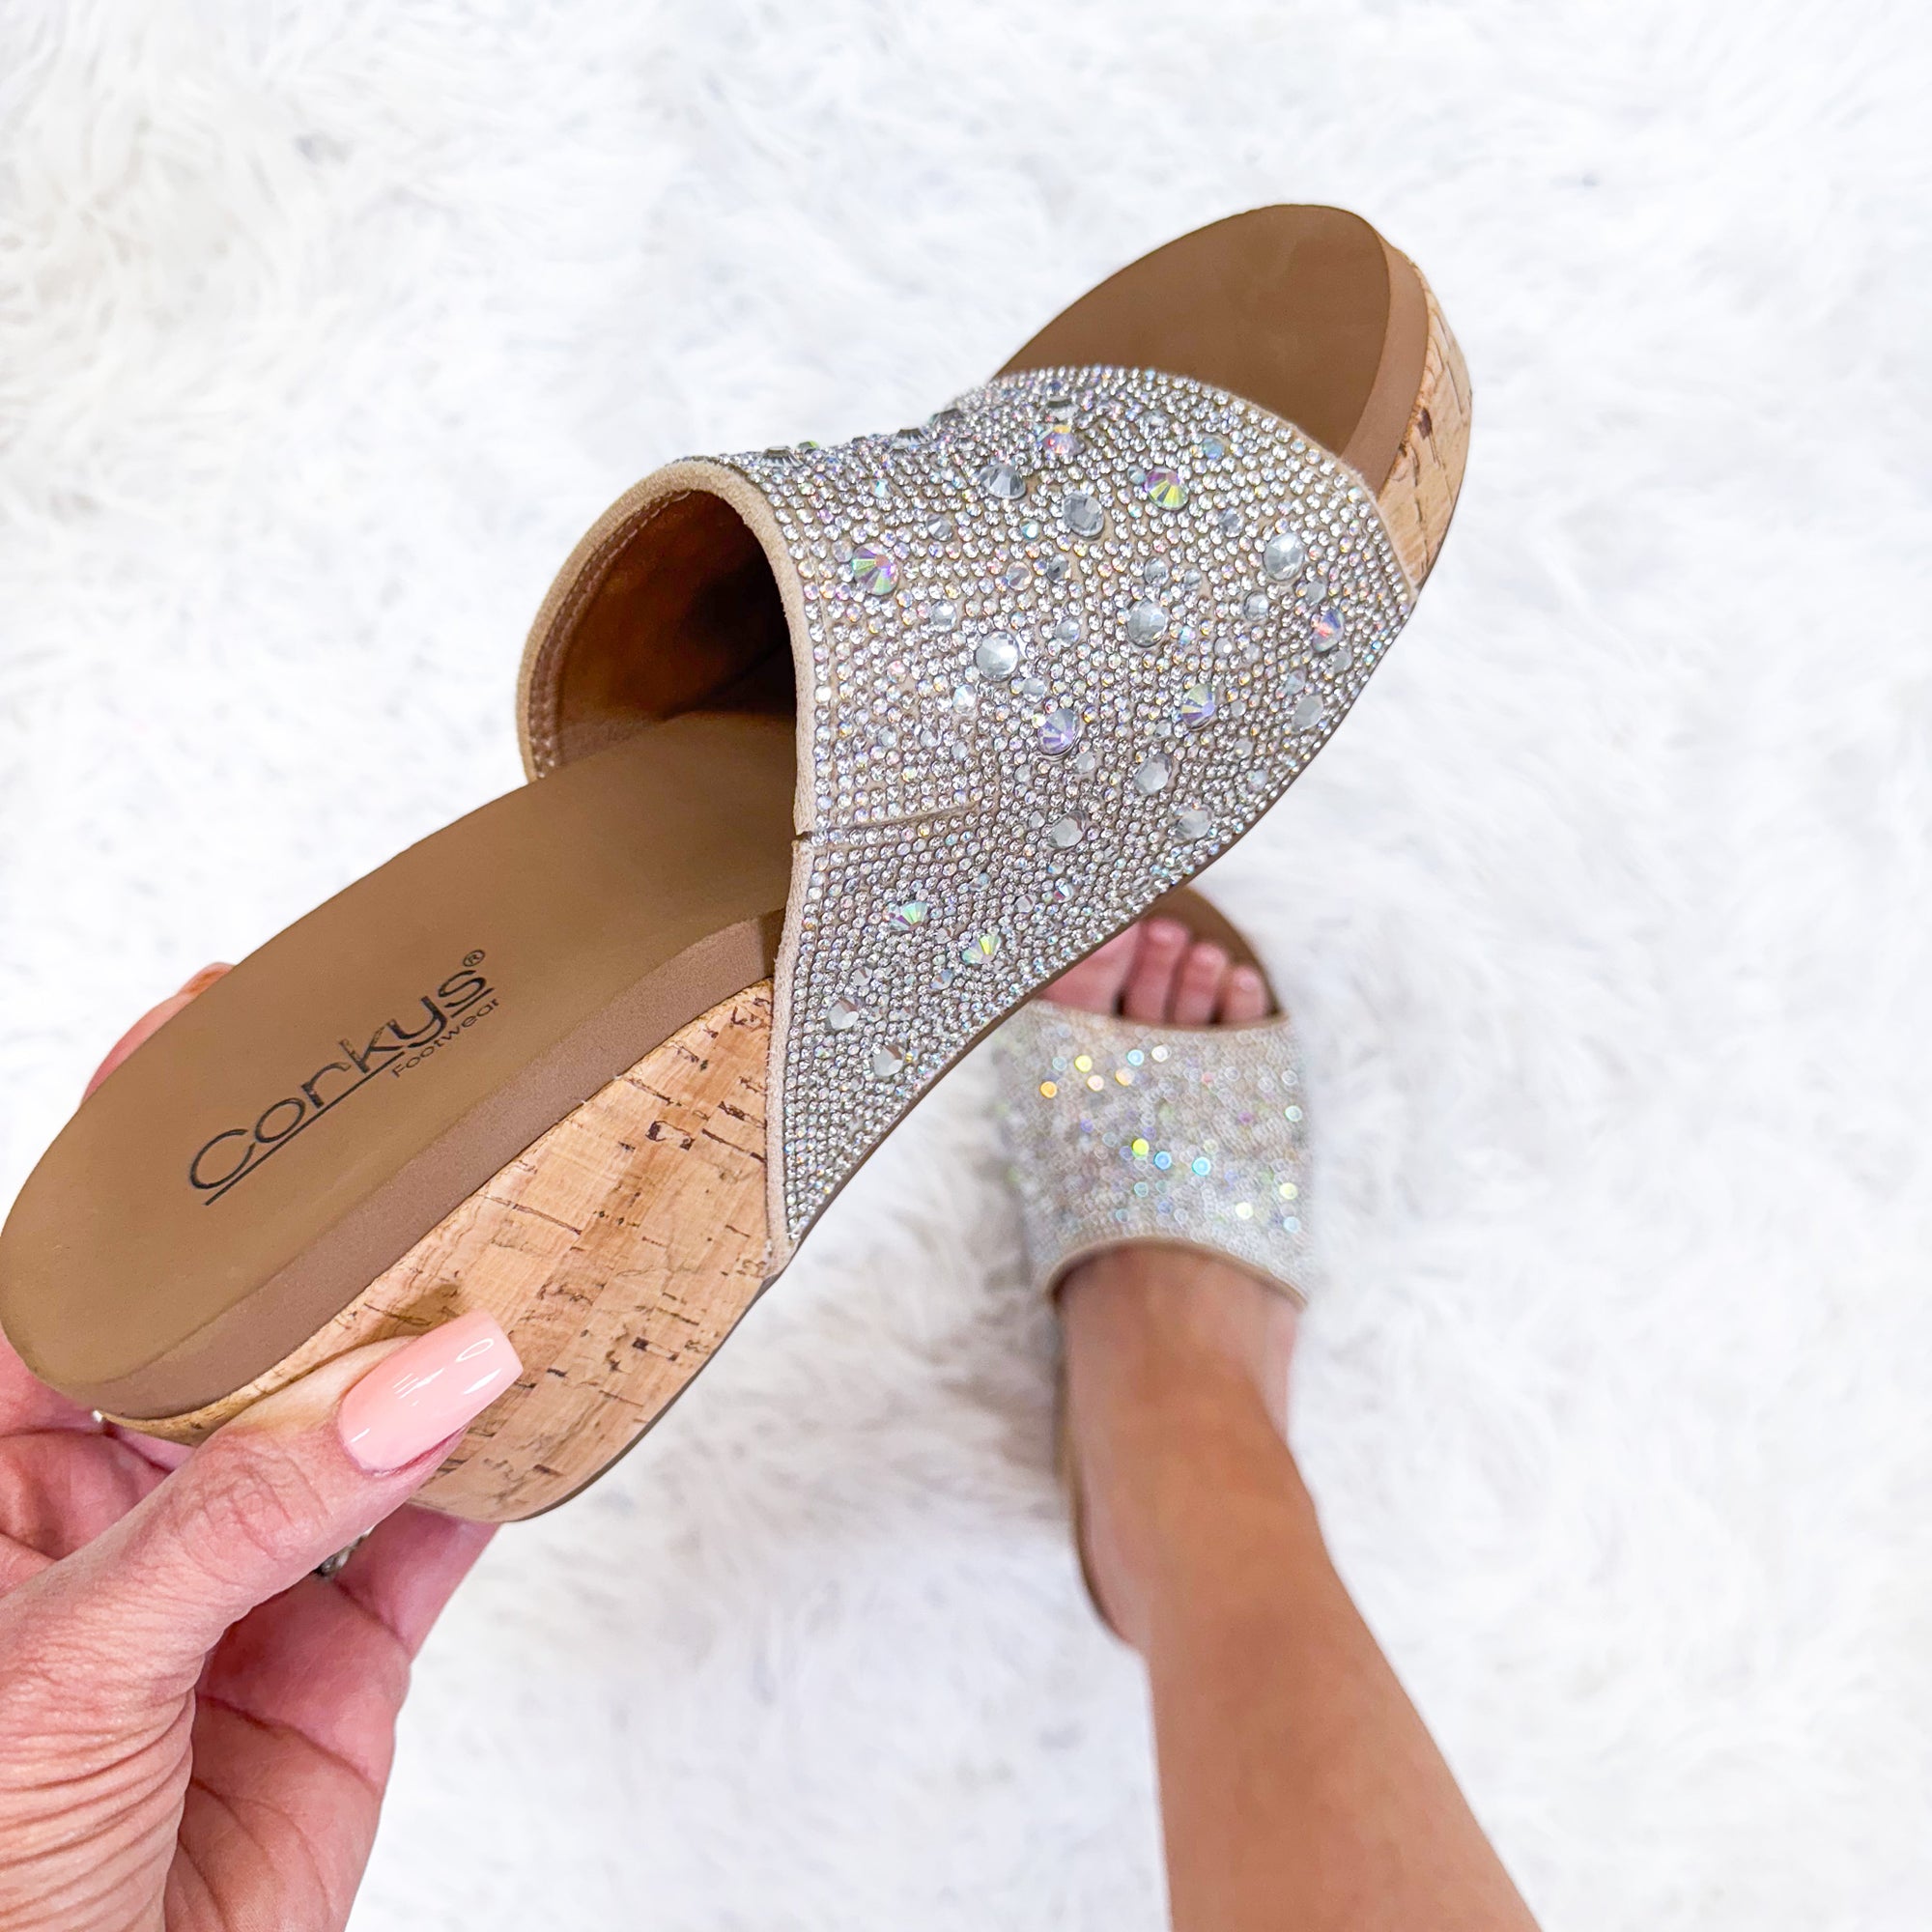 Corkys's Sunlight Clear Bling Wedge - Boujee Boutique 